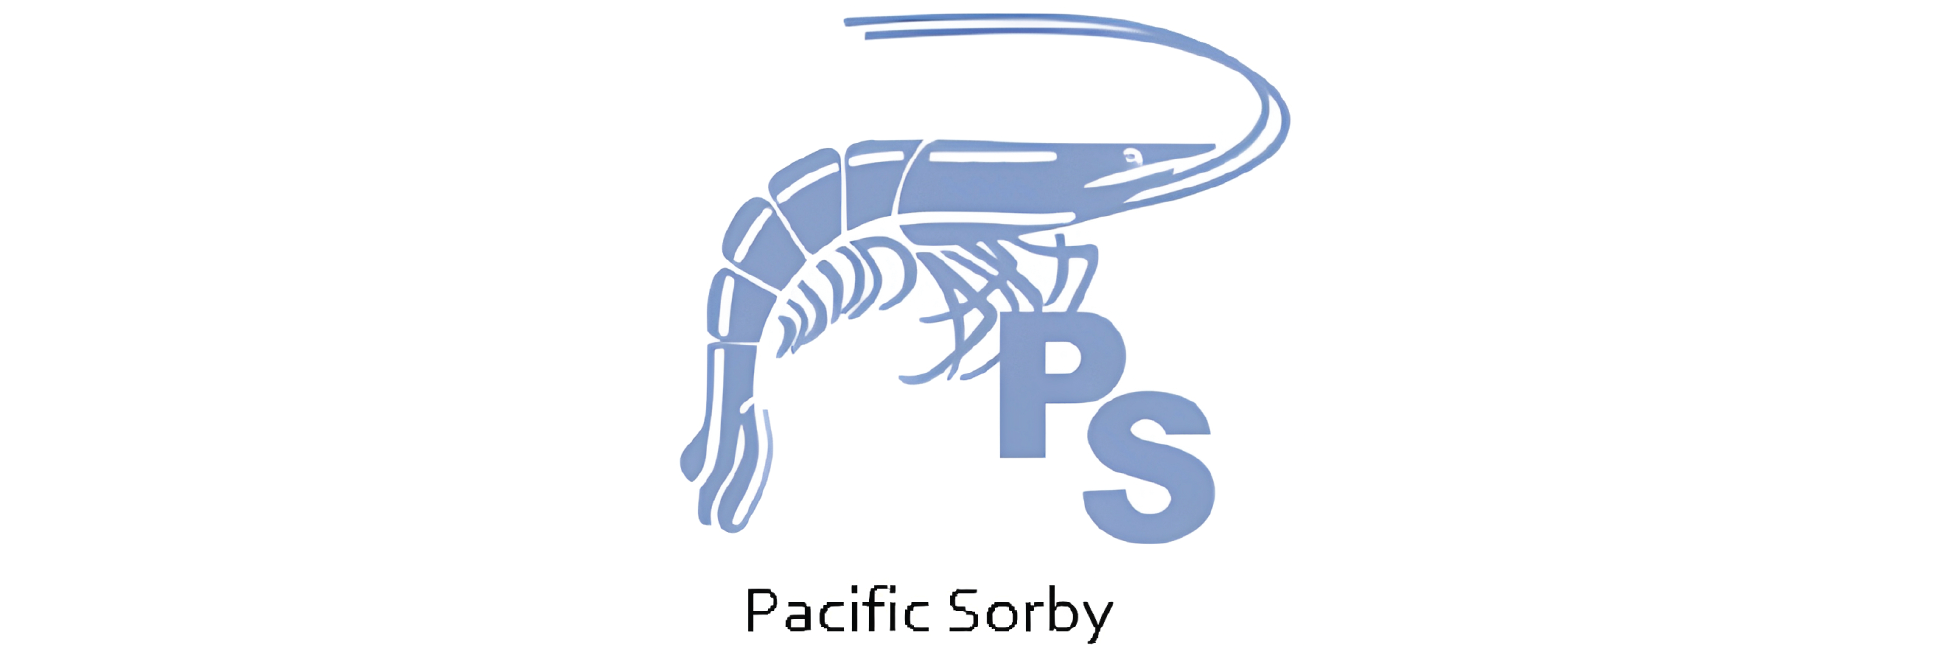 Pacific Sorby Logo